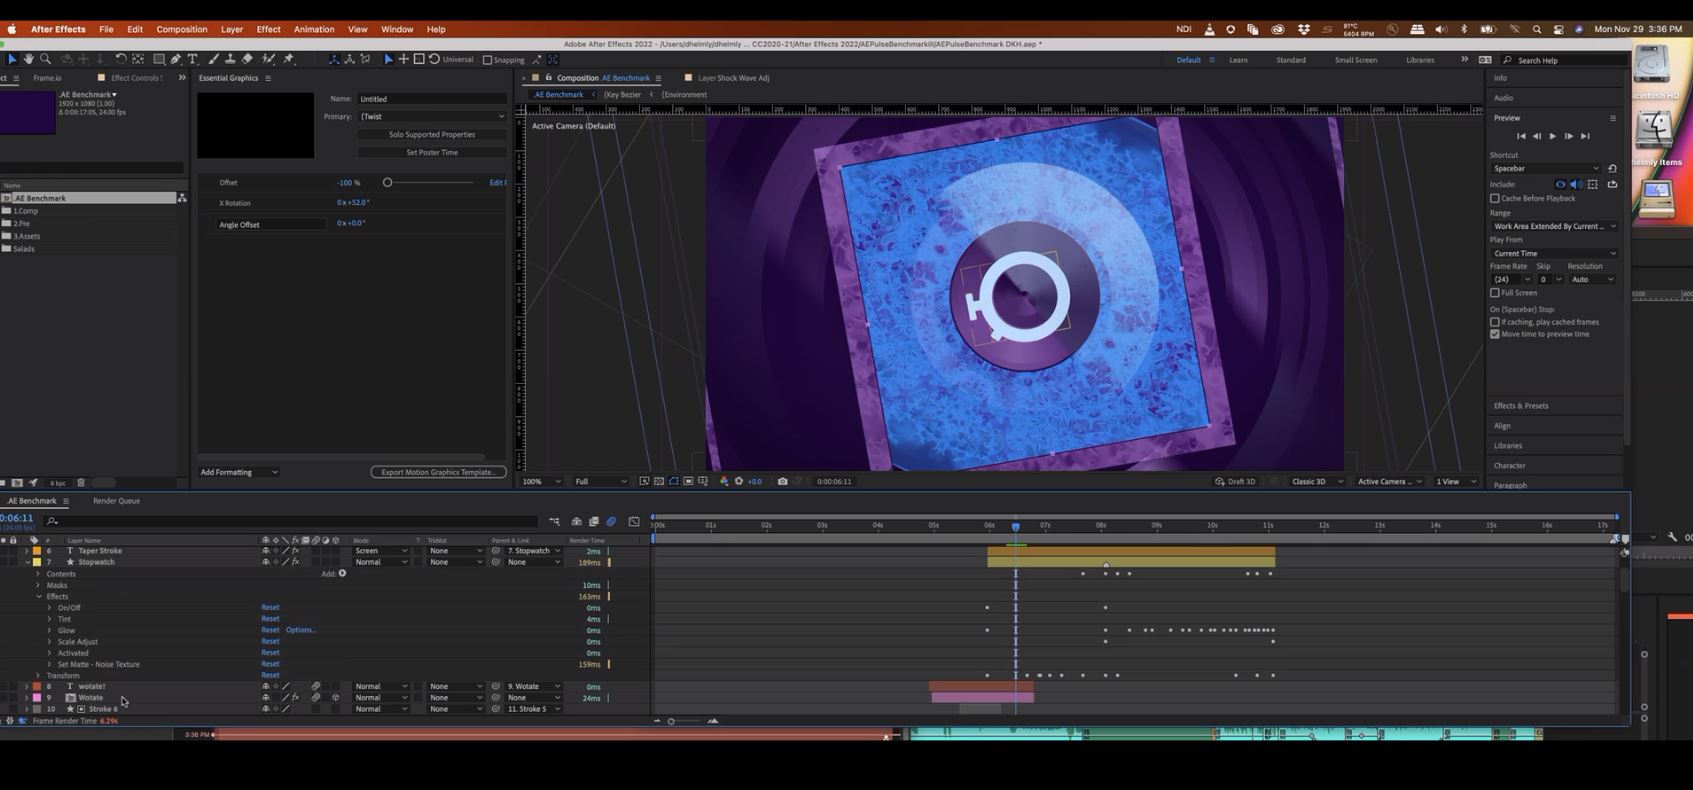 What Do You Need to Know about Hardware Updates to Optimize Premiere Pro? 16